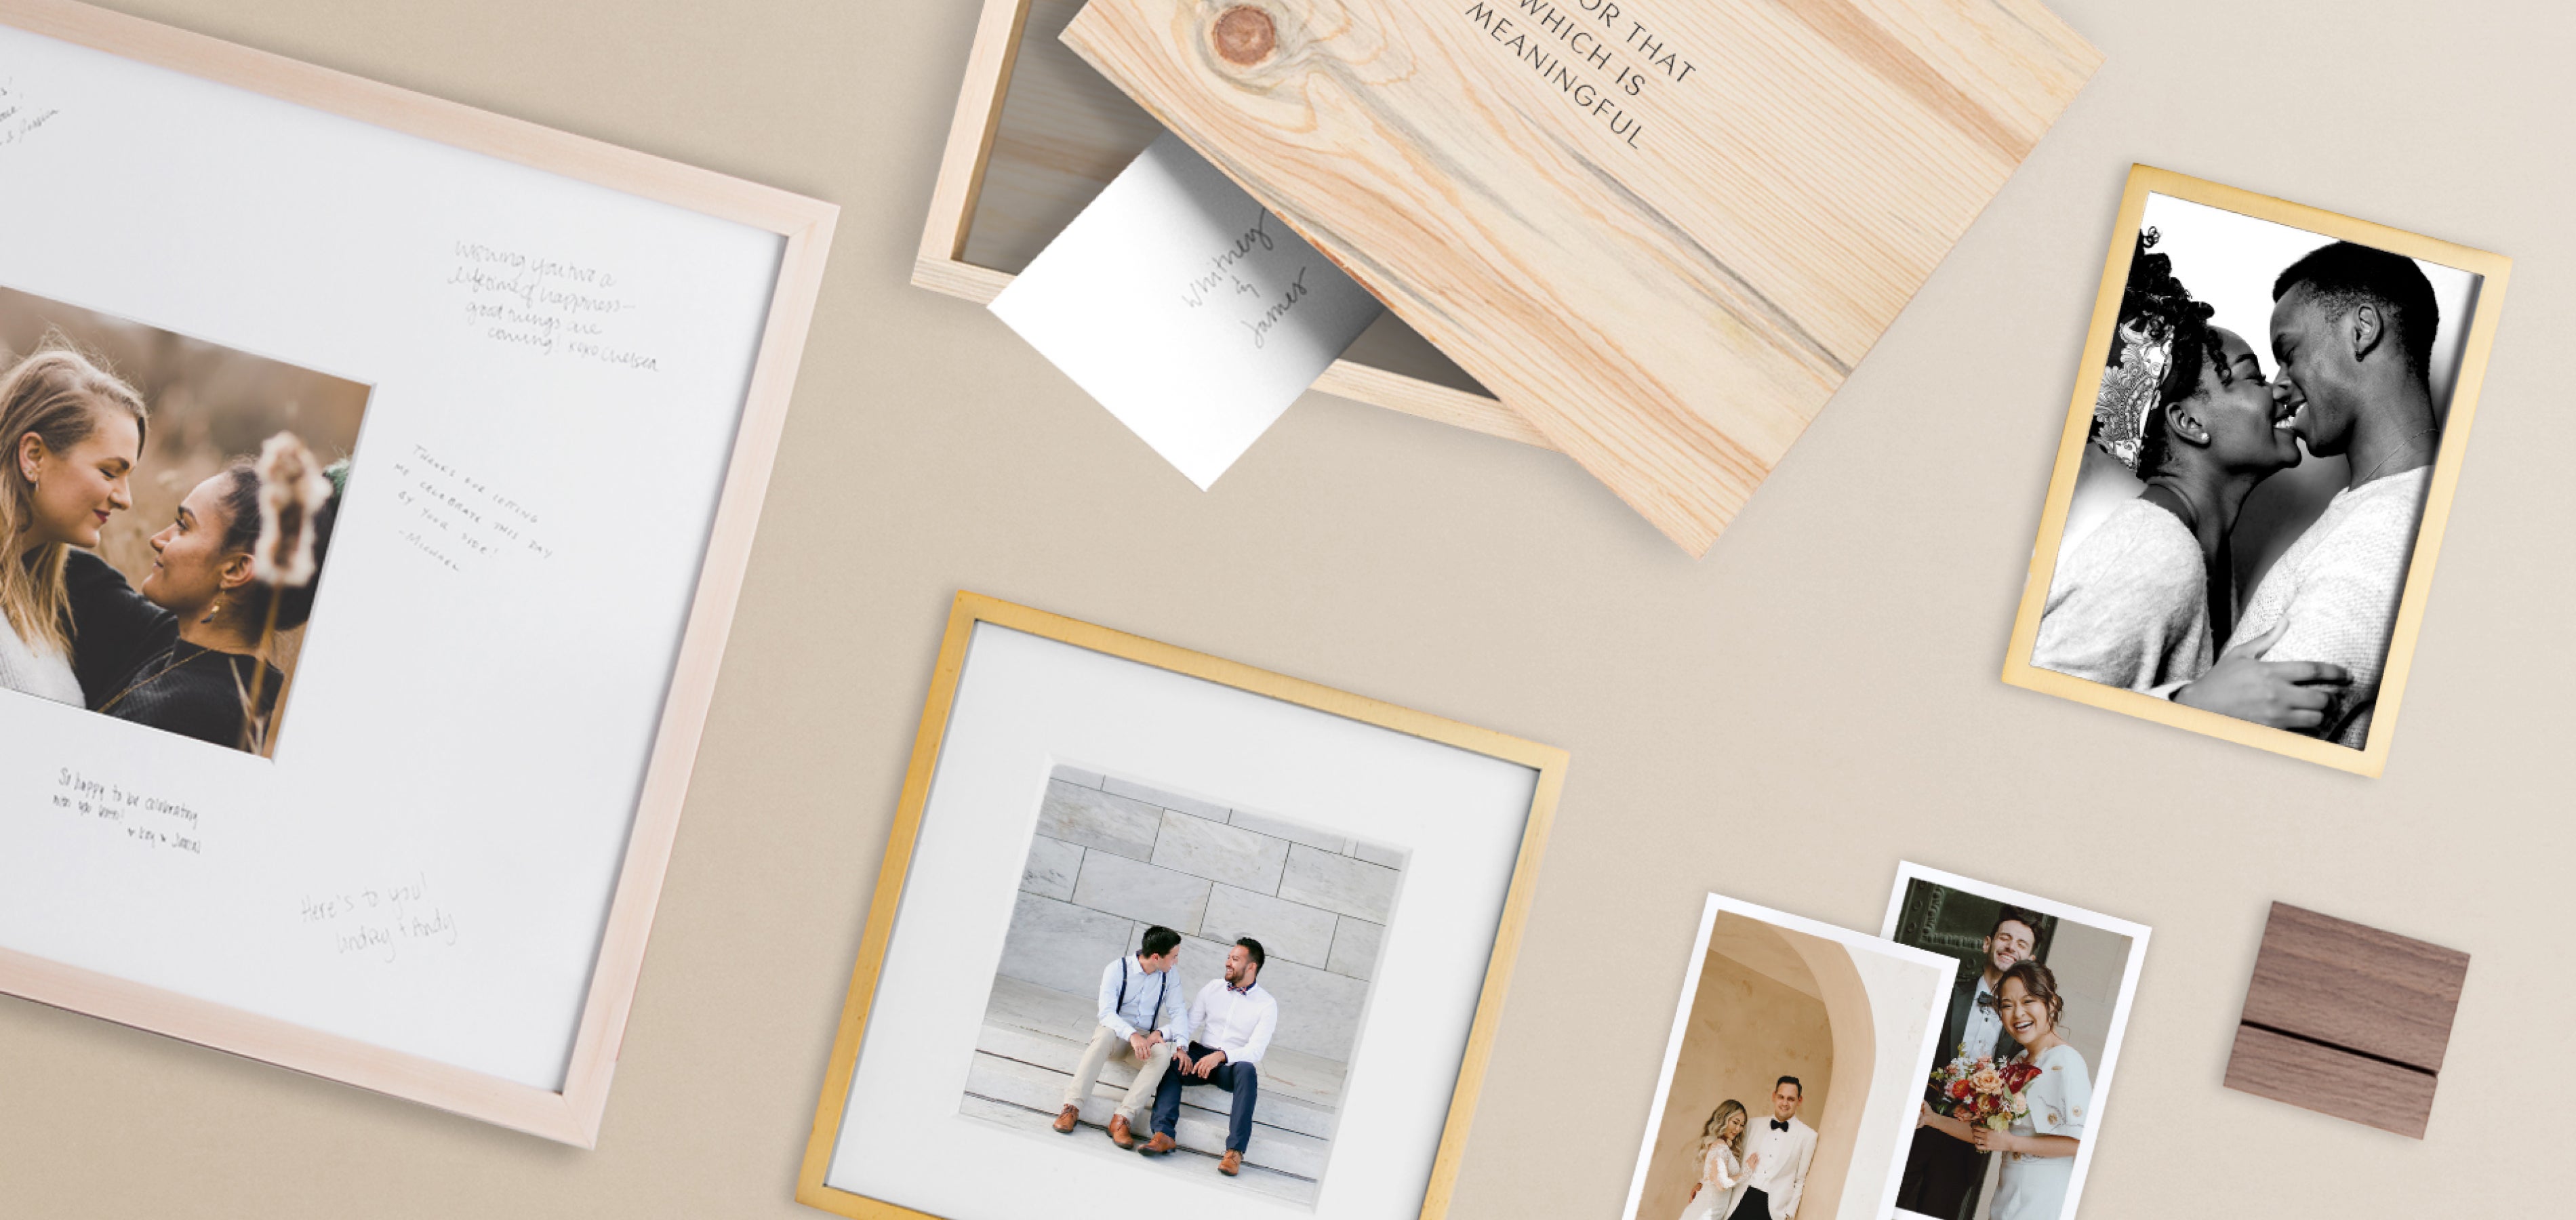 Several different Artifact Uprising frames, photo holders, and prints all featuring wedding photos of different couples